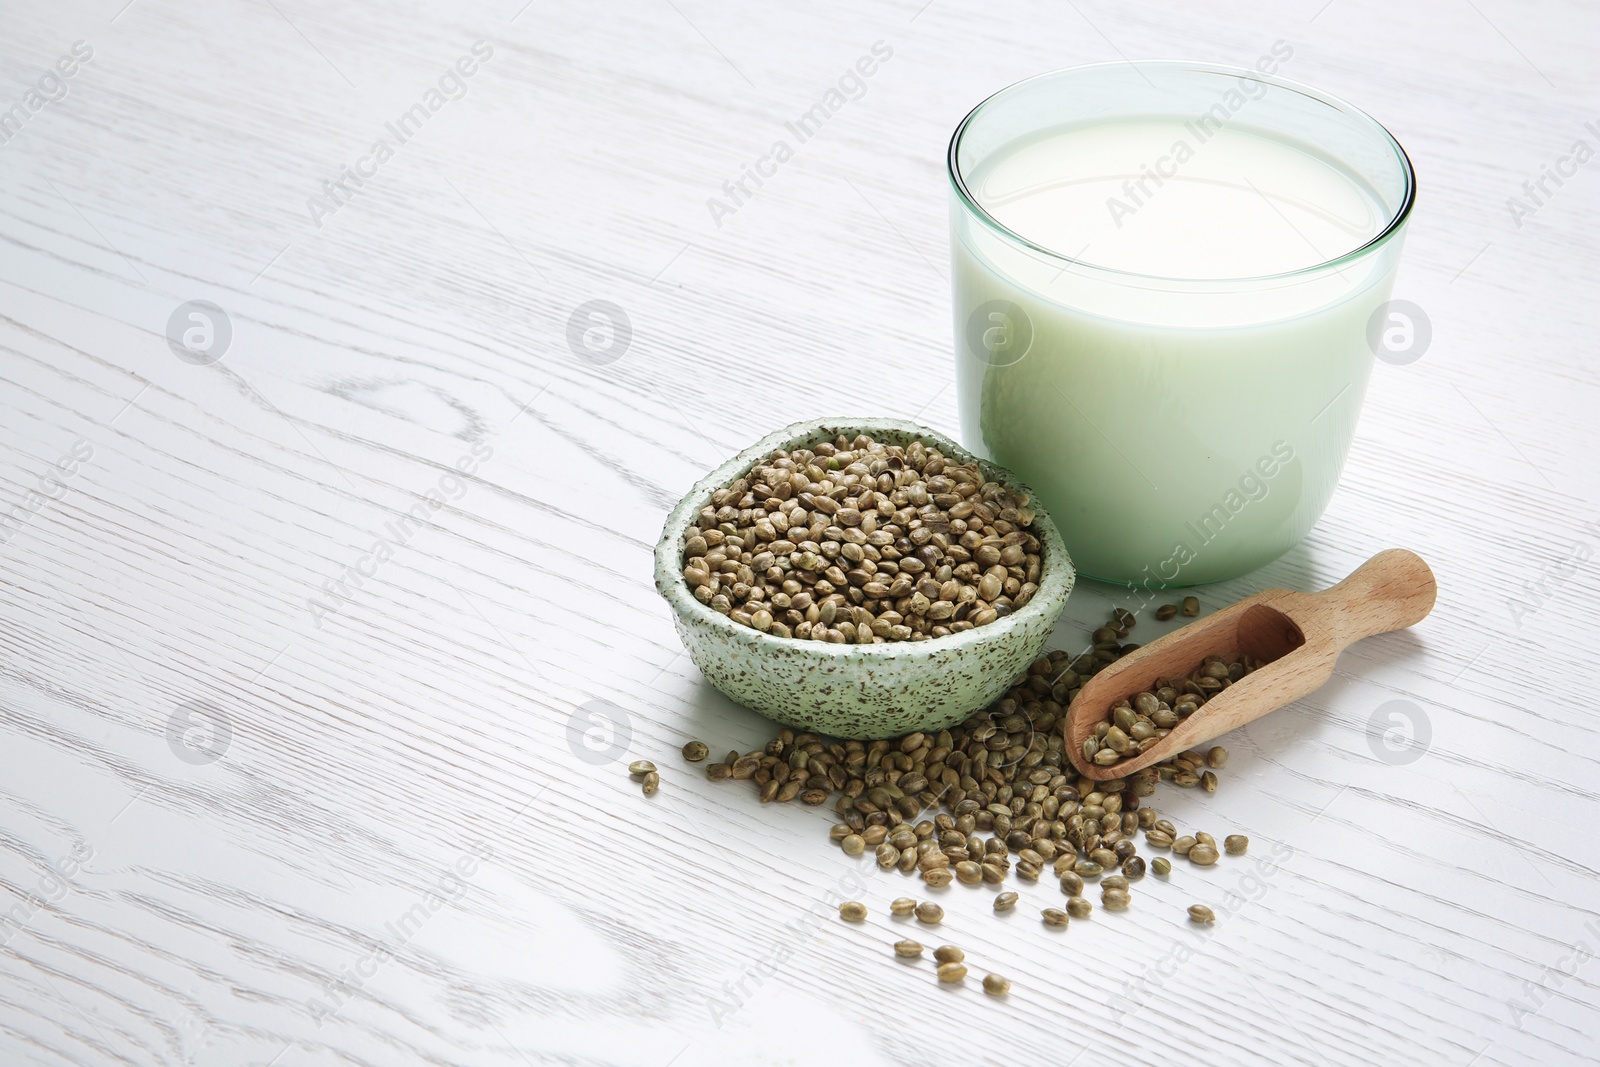 Photo of Hemp seeds and glass of milk on wooden background